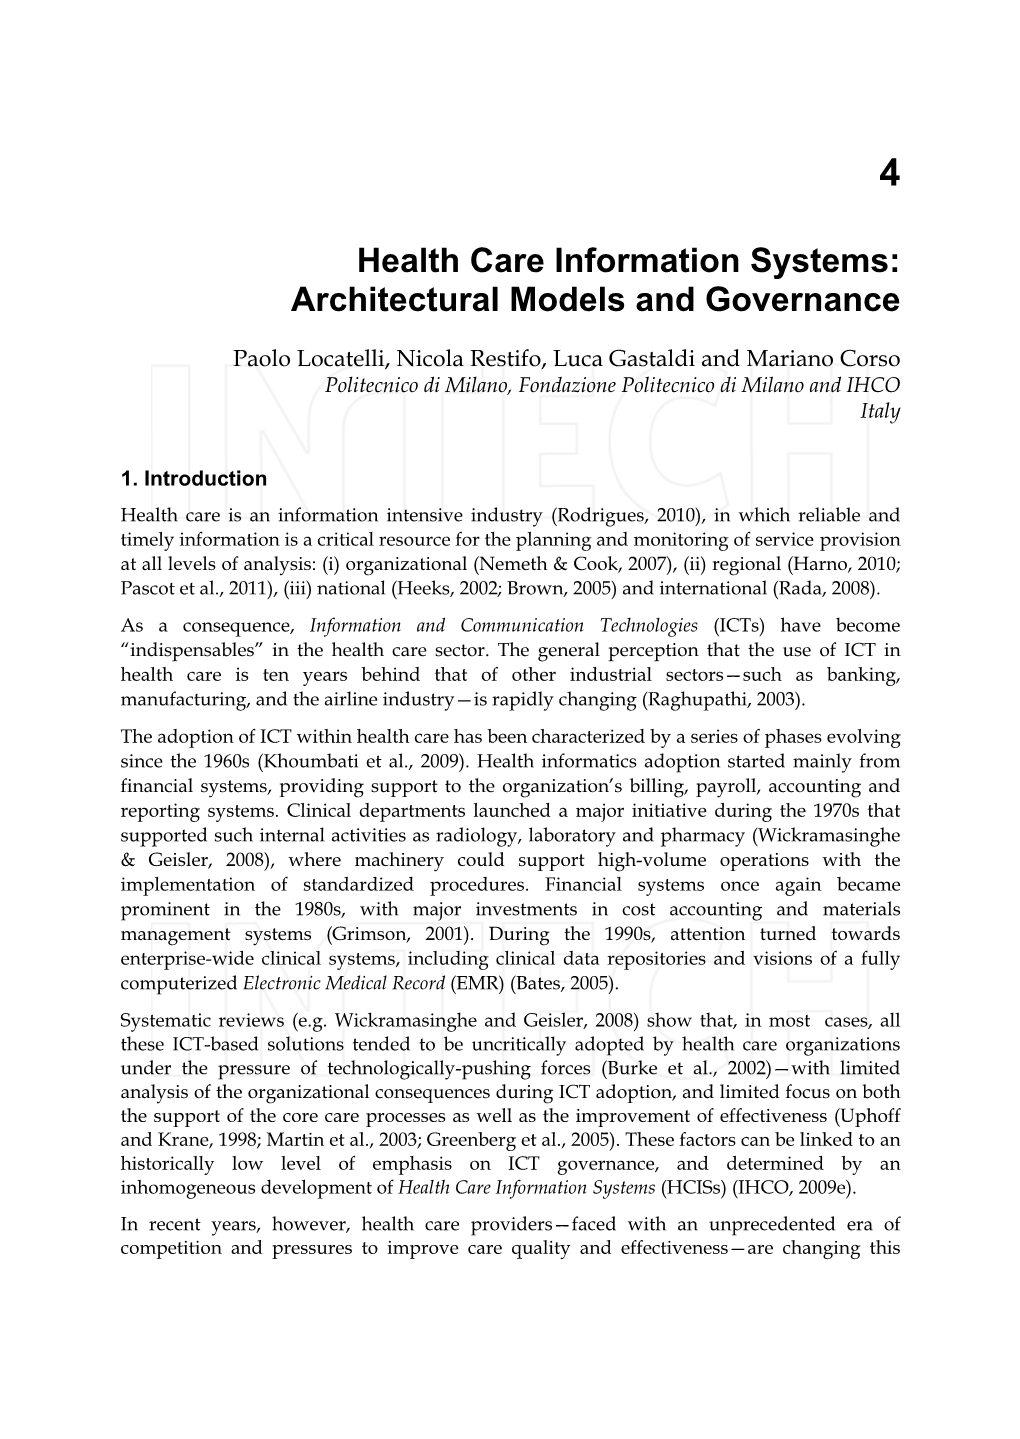 Health Care Information Systems: Architectural Models and Governance